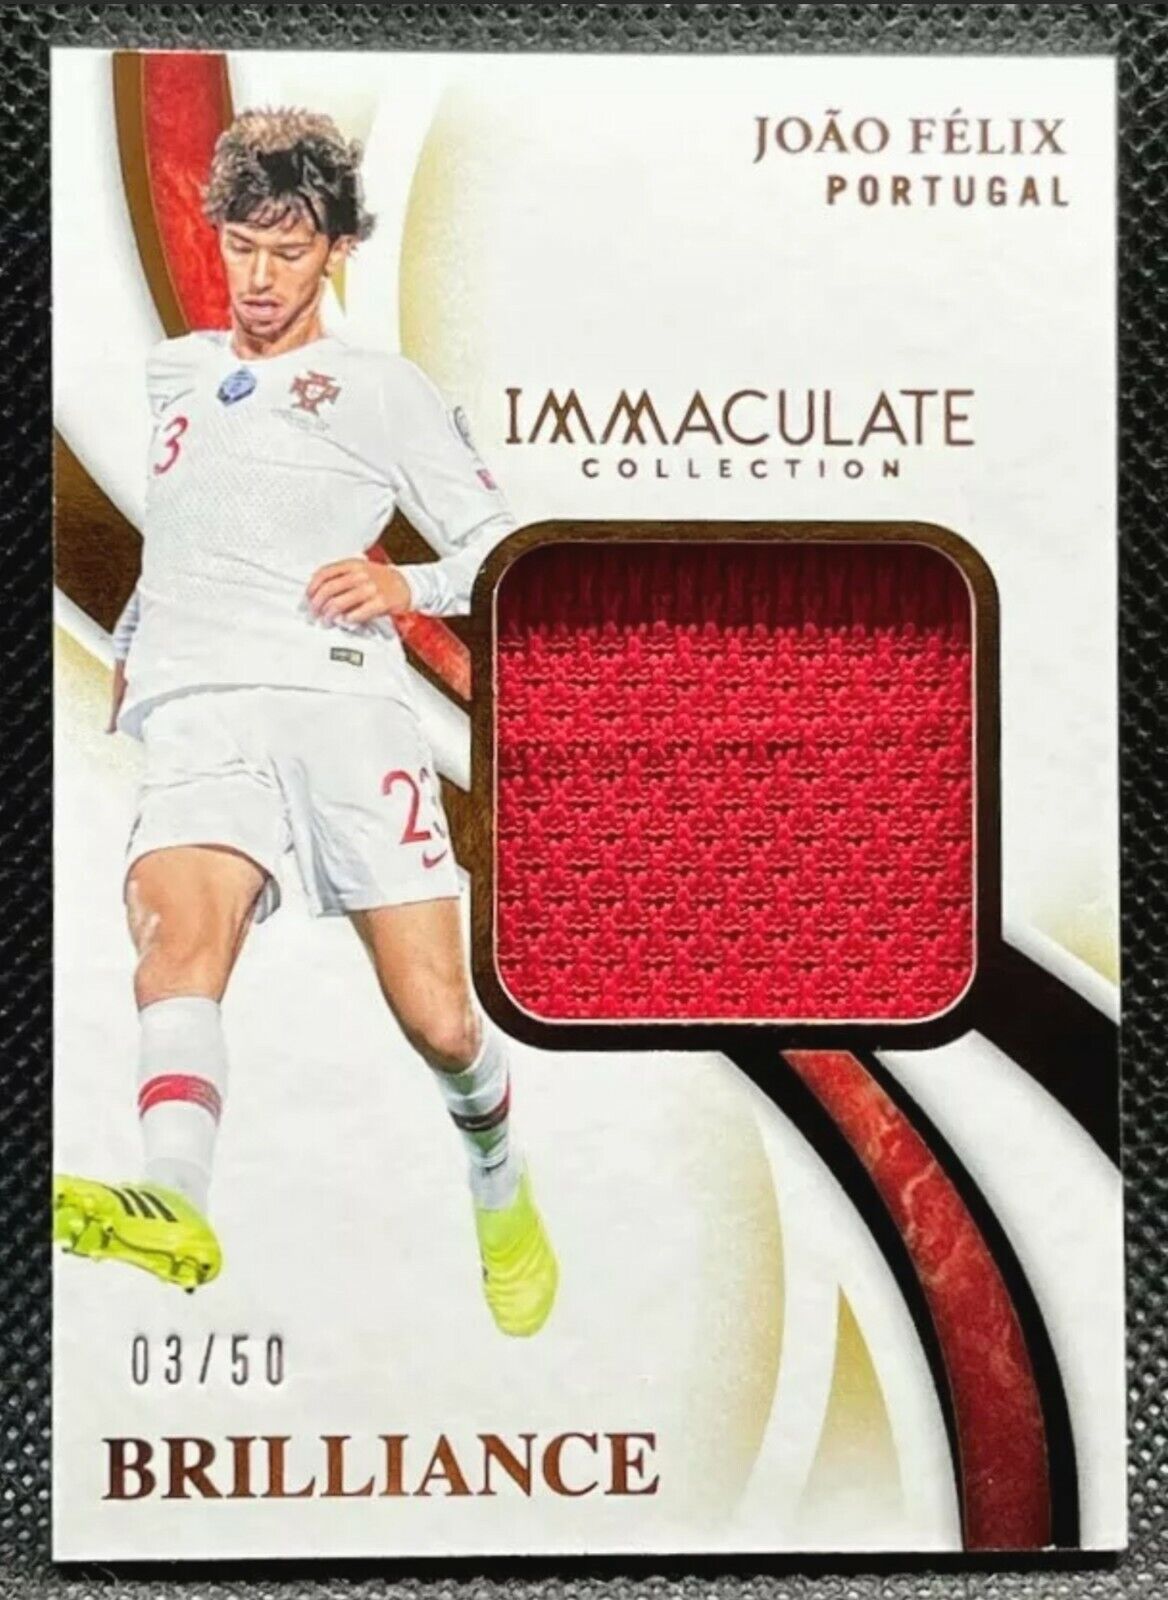 2020 Panini Immaculate = Joao Felix = Bronze Brilliance patch # would be/50...